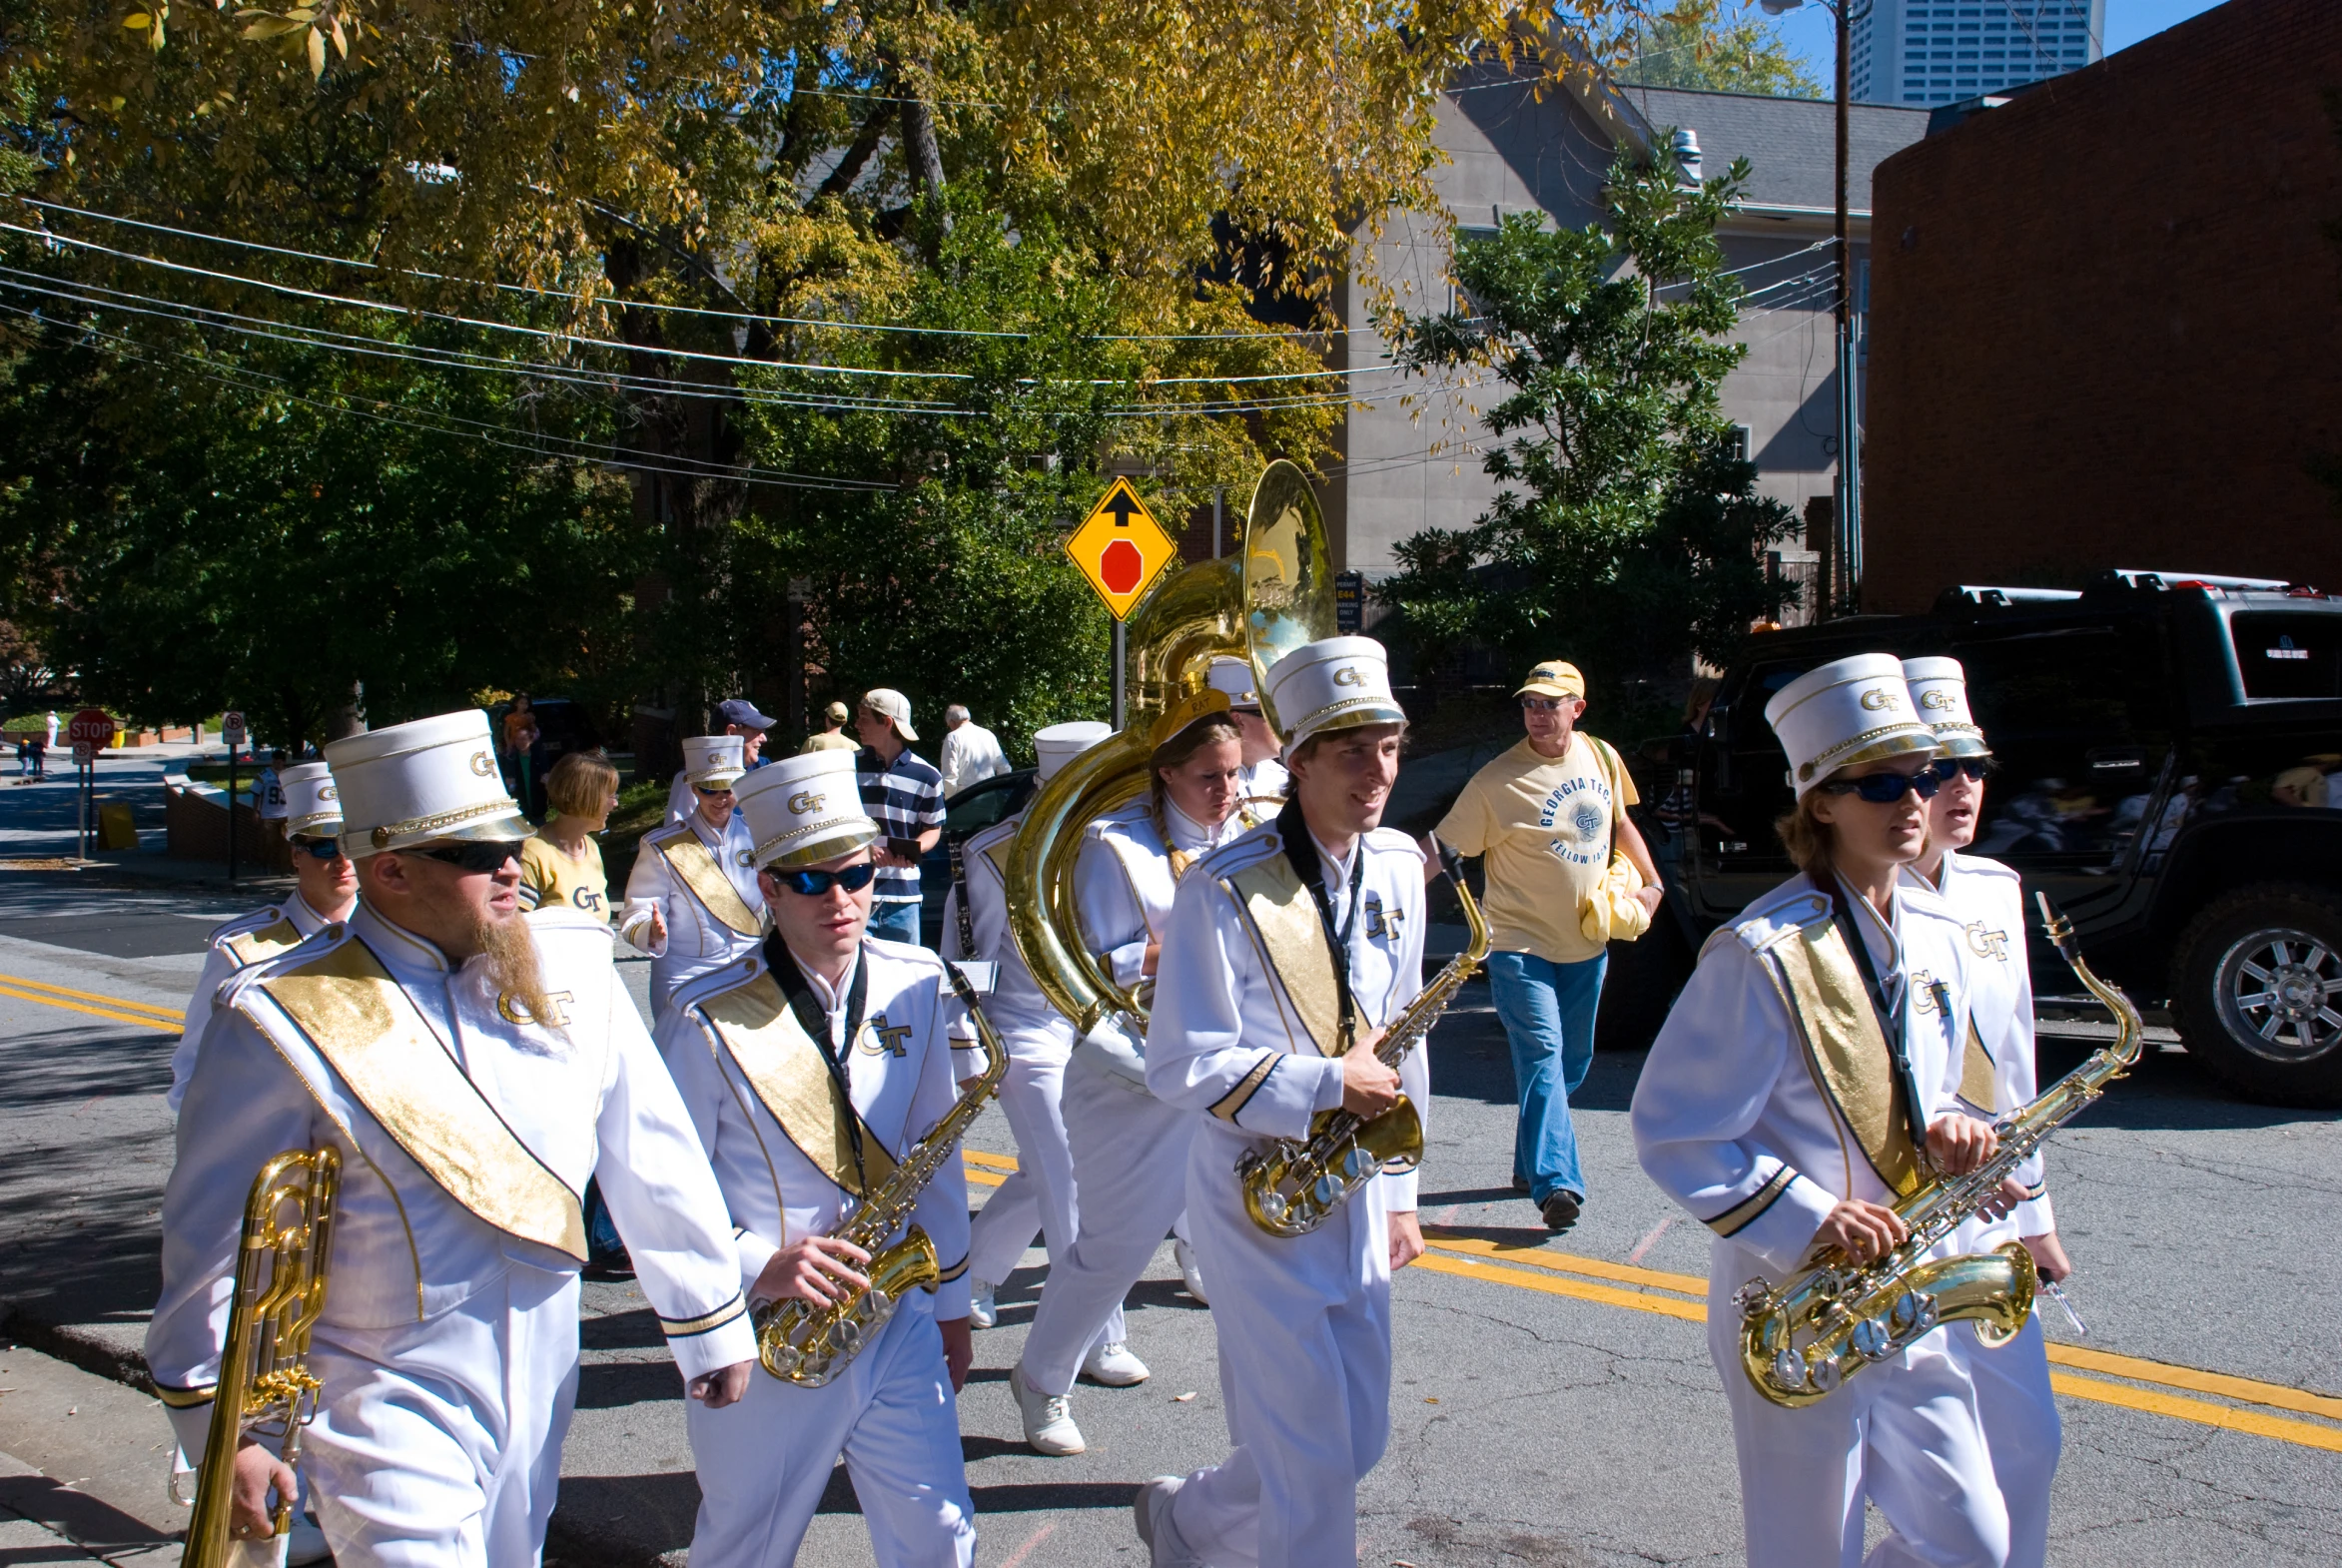 a parade of people marching down a street